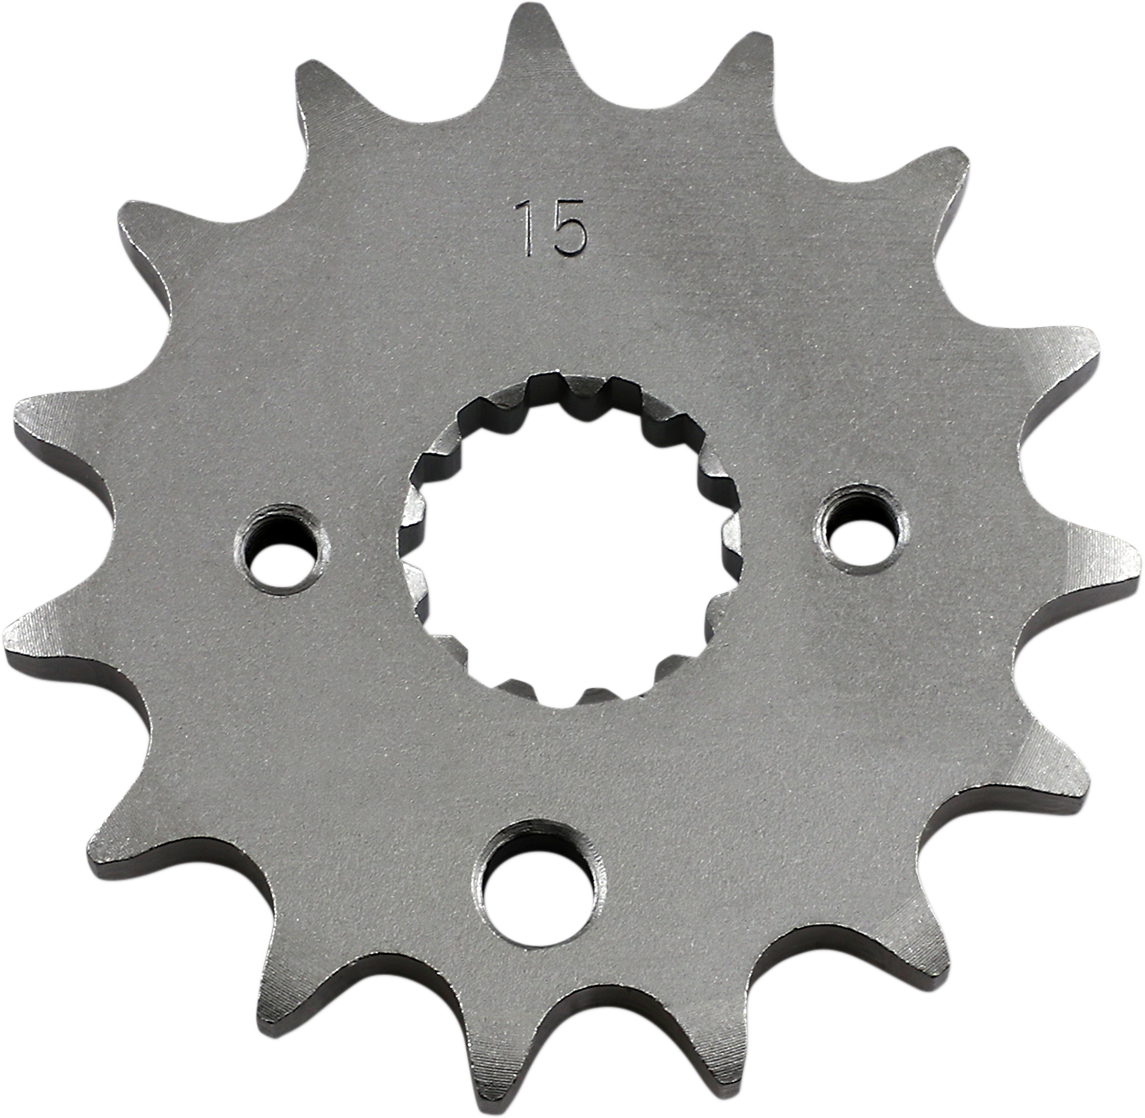 Parts Unlimited Countershaft Sprocket - 15-Tooth 13144-1046